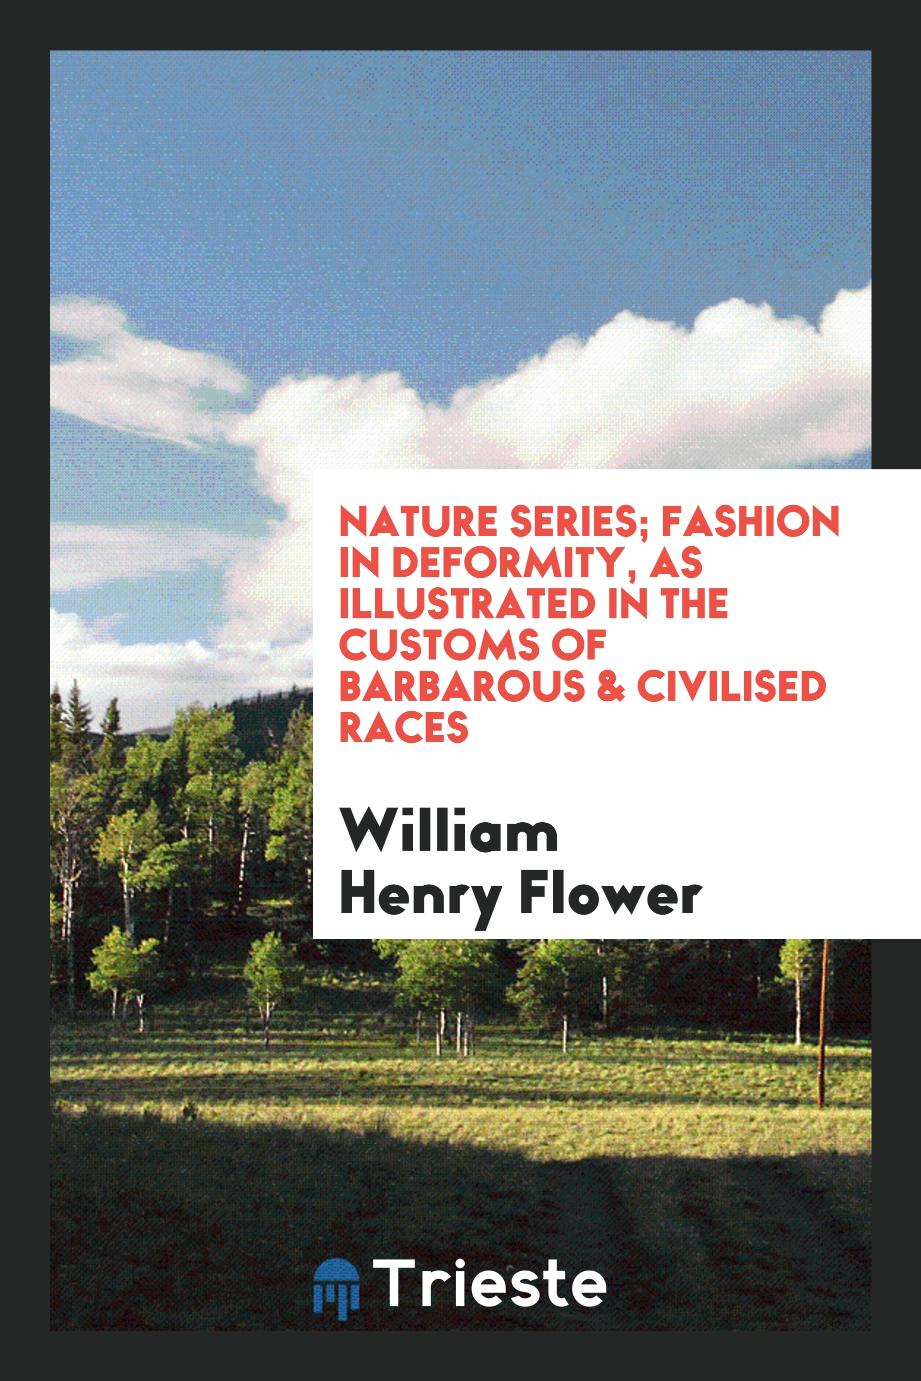 Nature Series; Fashion in Deformity, as Illustrated in the Customs of Barbarous & Civilised Races